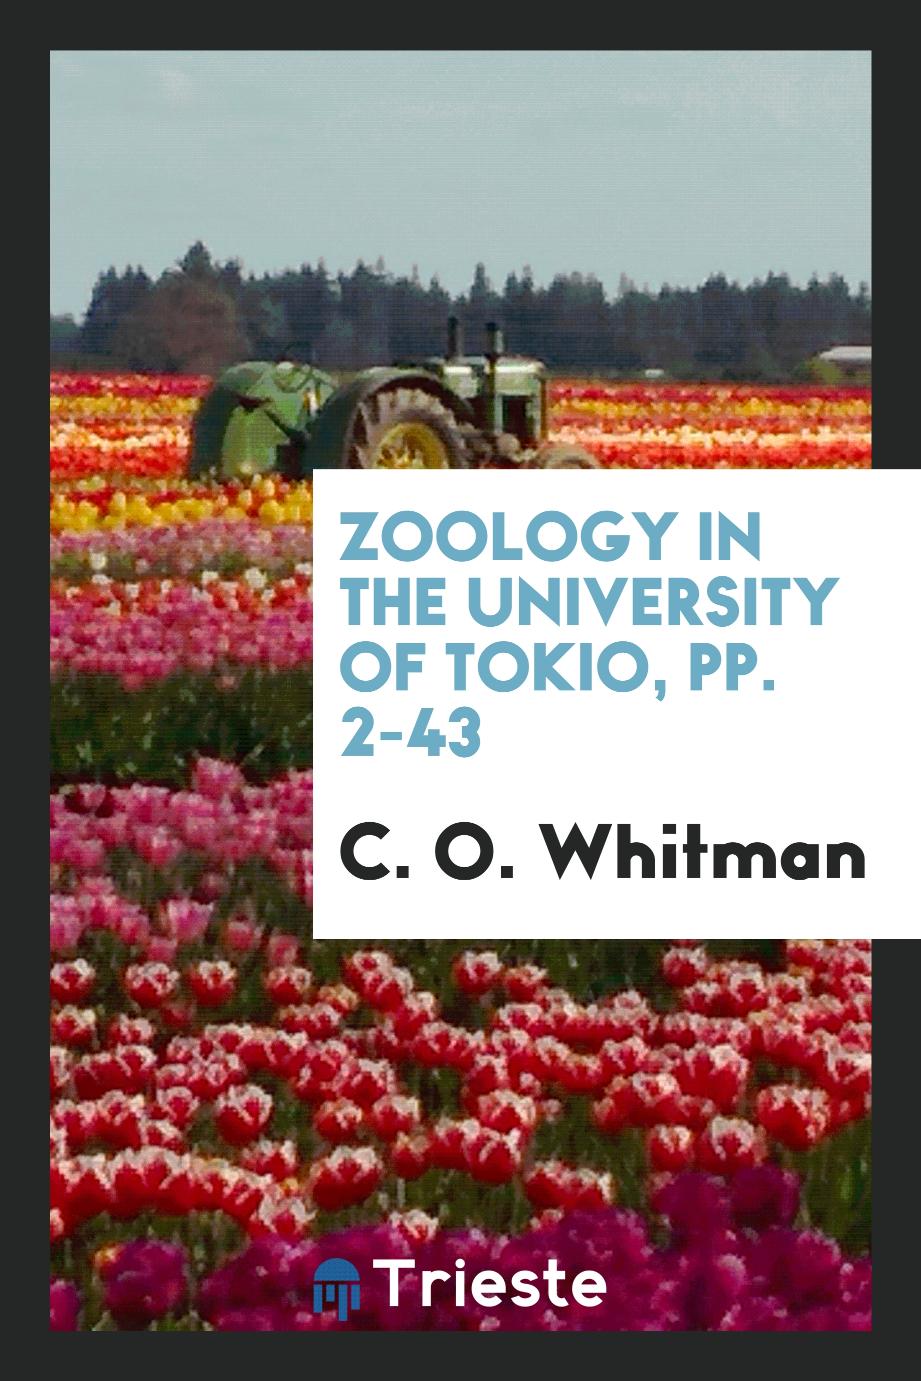 Zoology in the University of Tokio, pp. 2-43